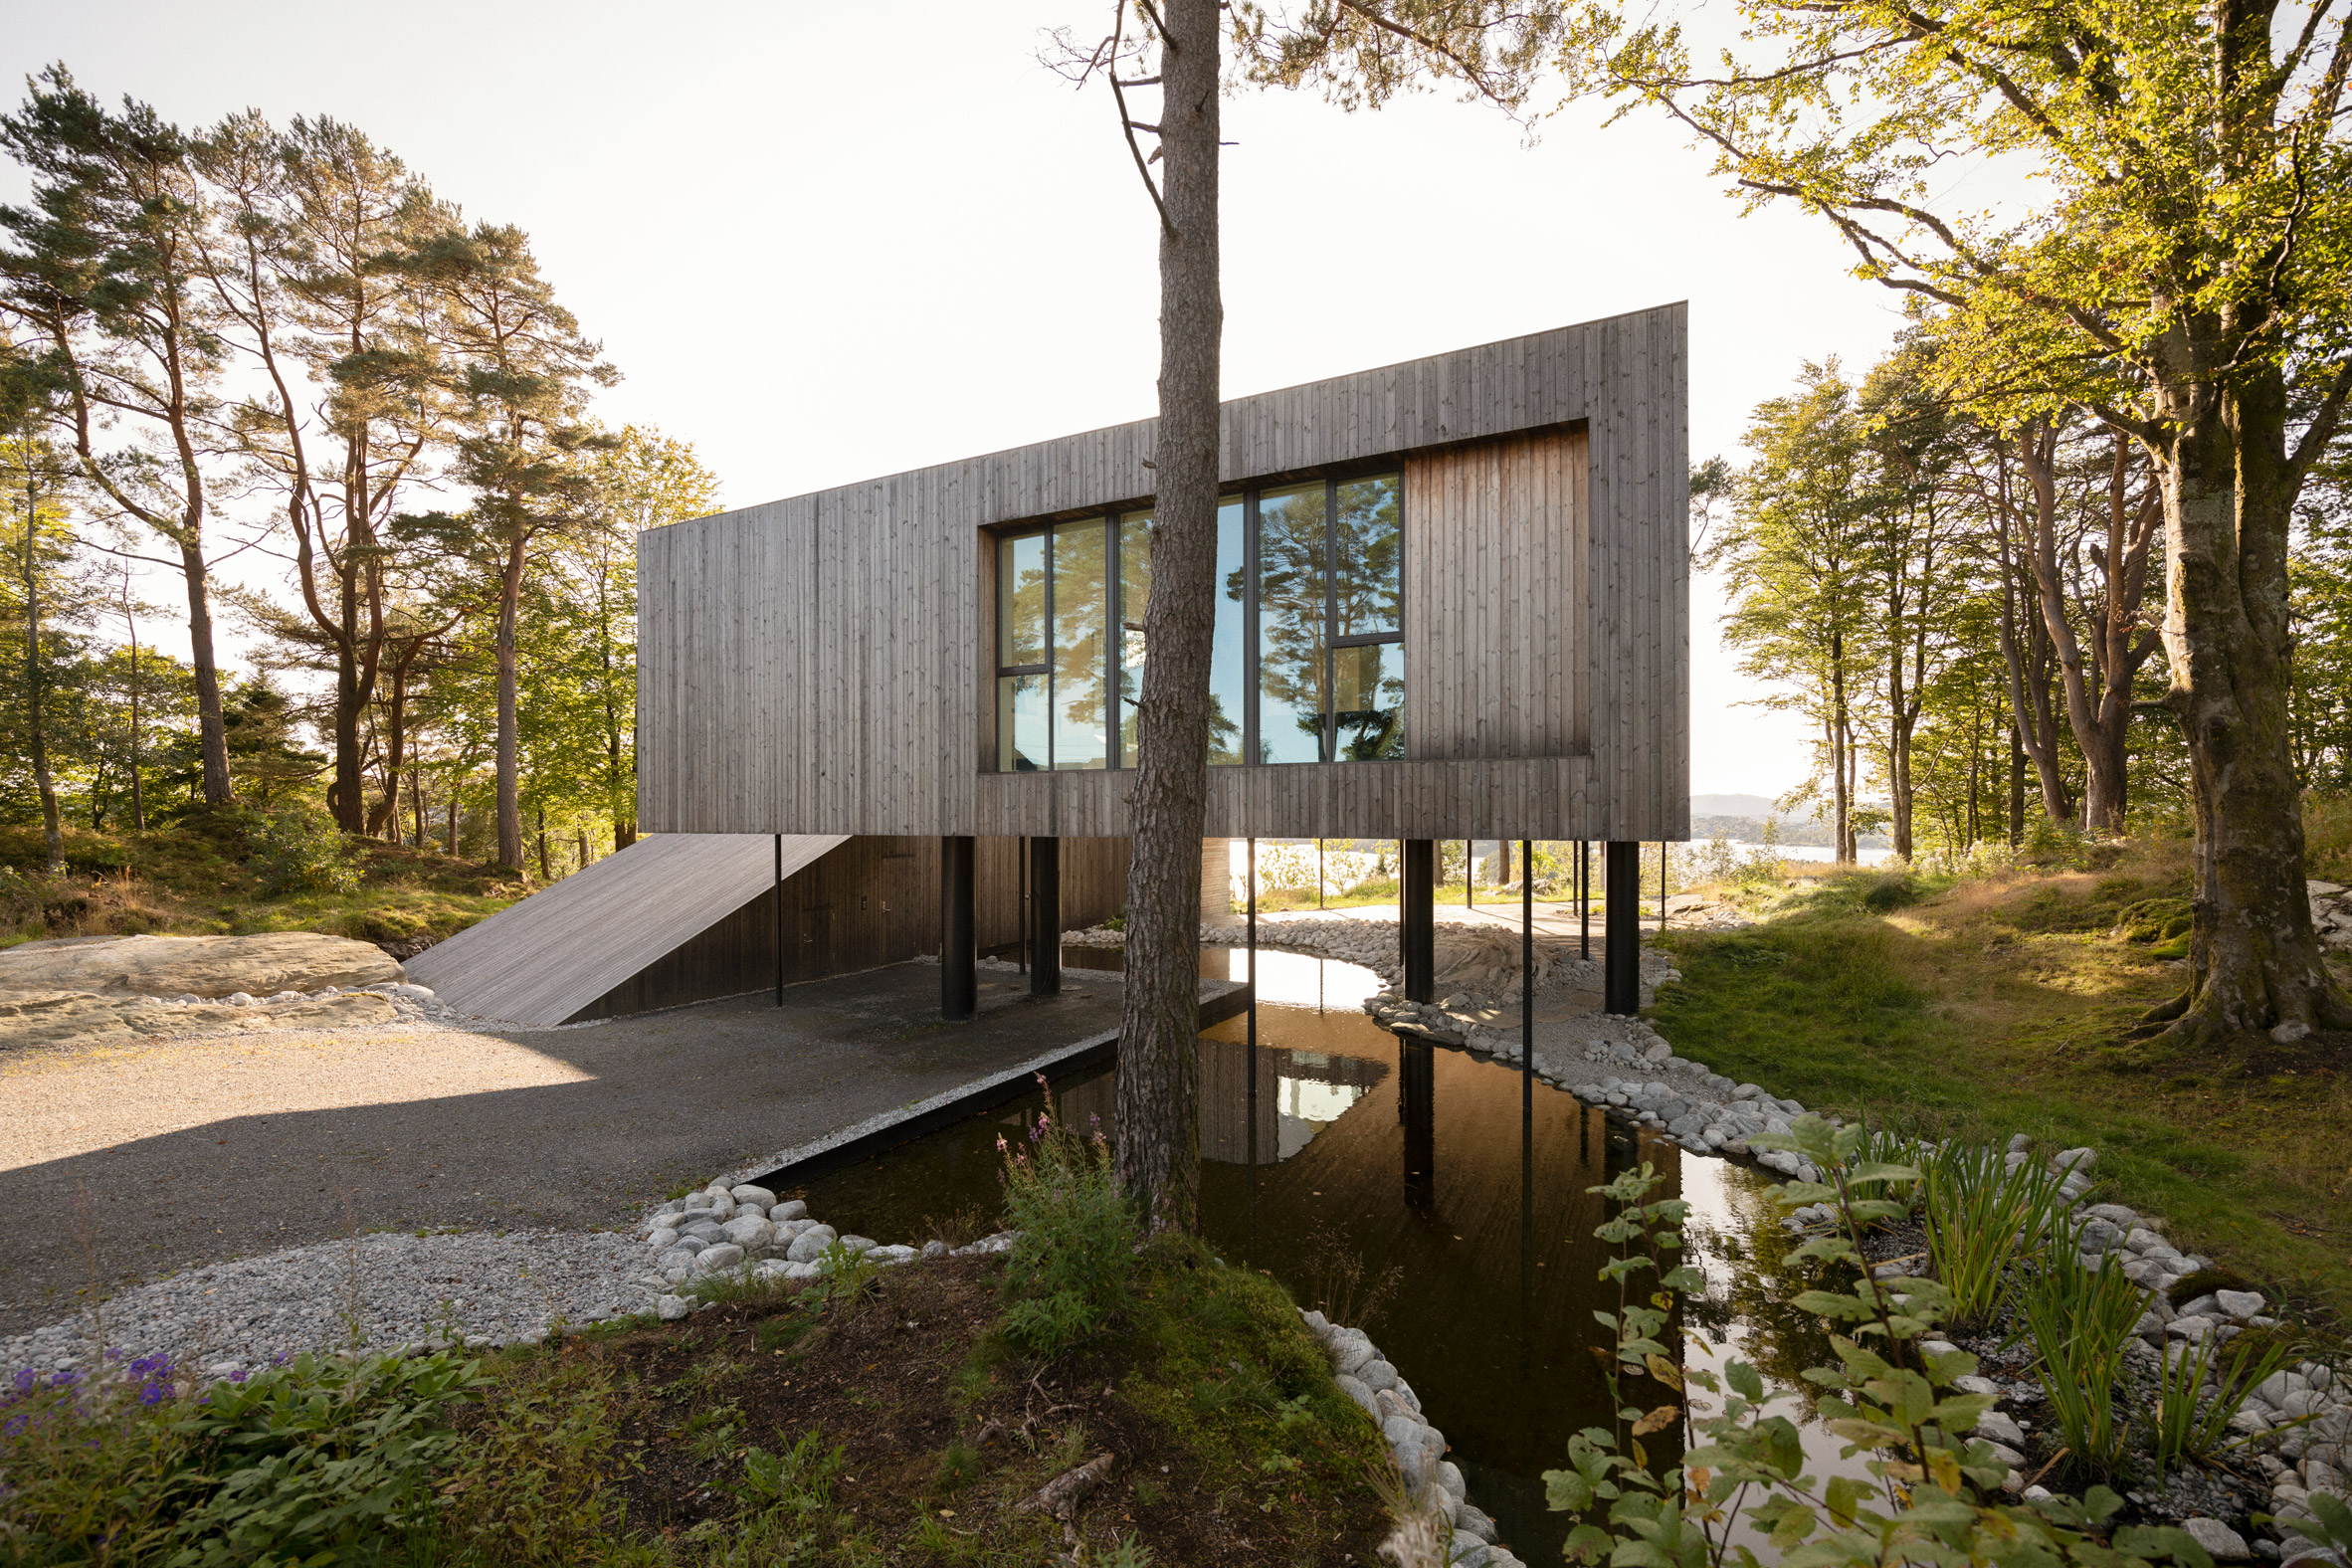 Two-storey timber villa raised on stilts over water in Norway